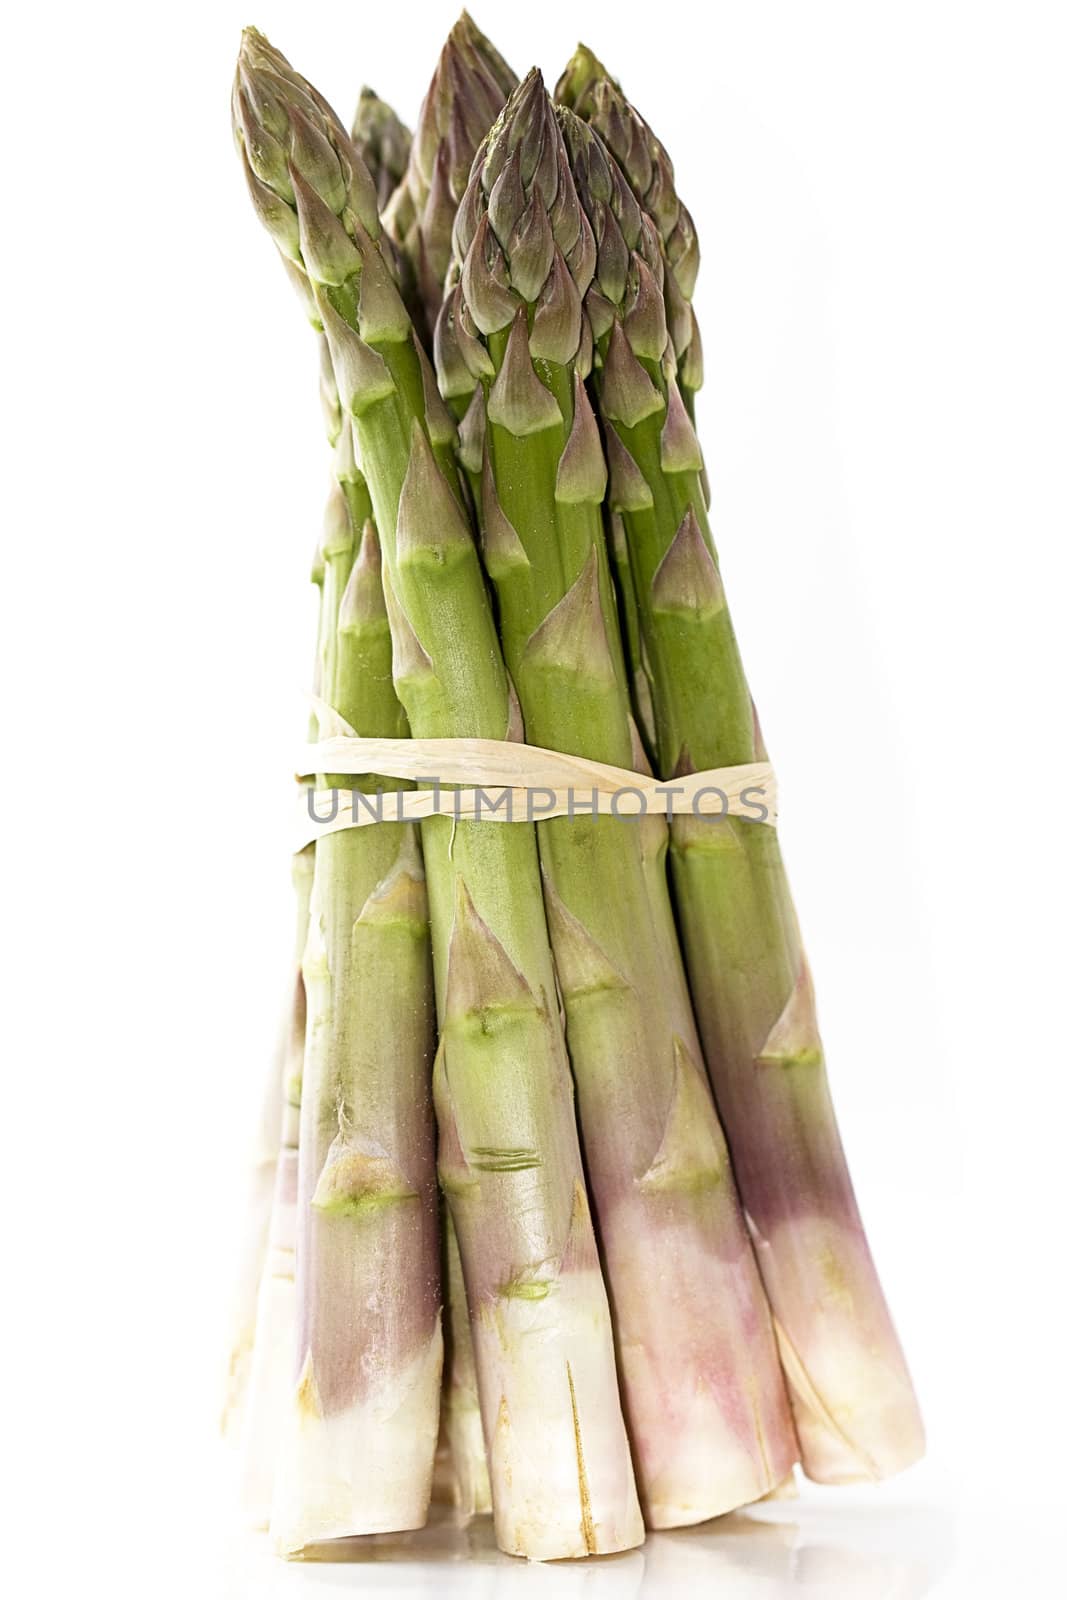 a bundle of green asparagus on white background